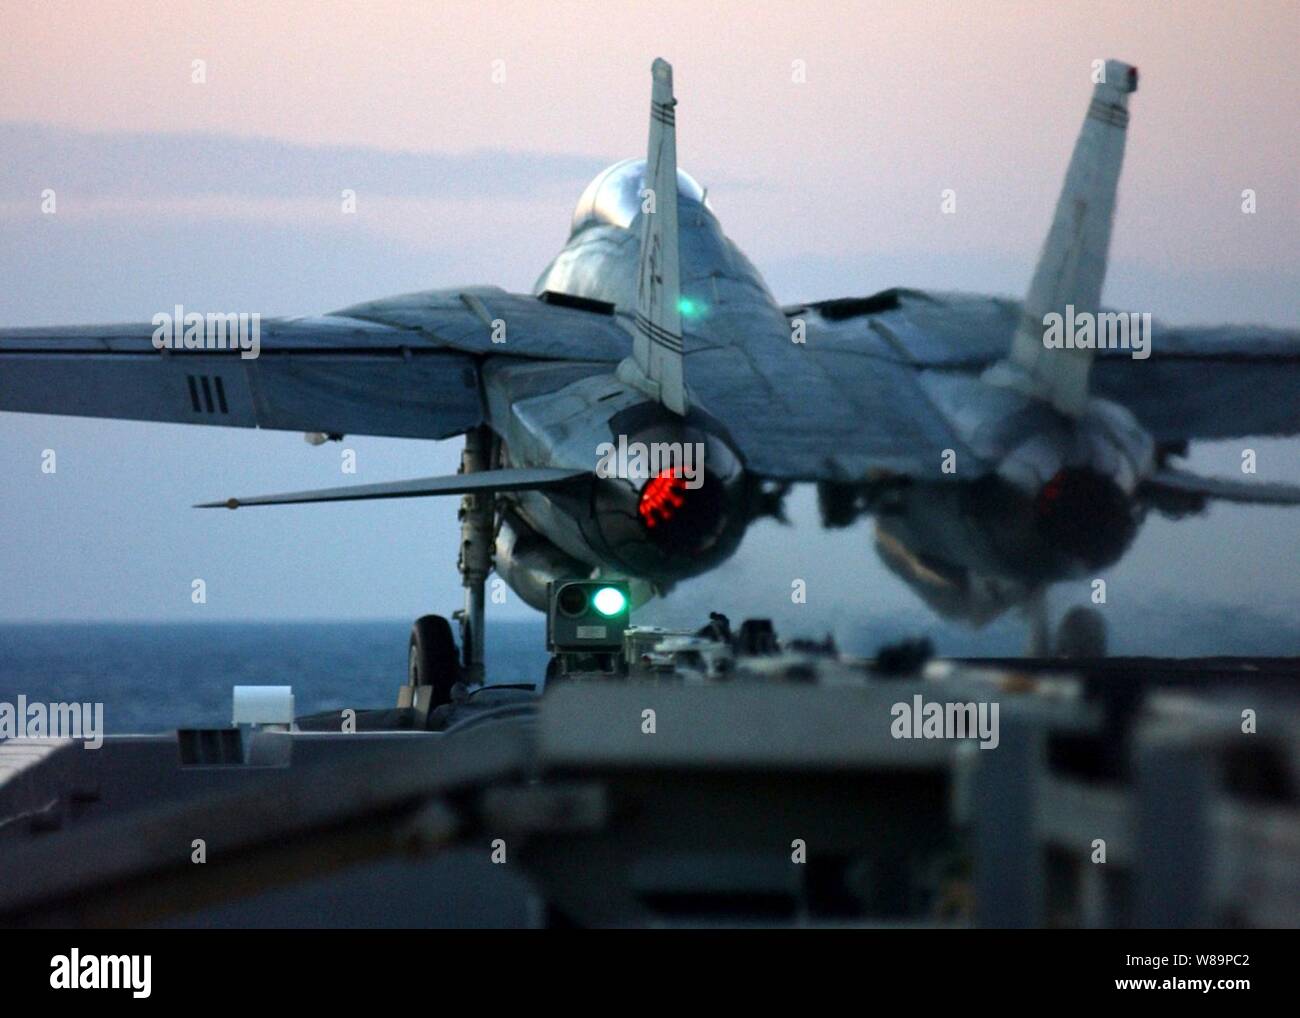 An F-14B Tomcat is catapulted from the flight deck of the aircraft carrier USS Harry S. Truman (CVN 75) during evening flight operations in the Persian Gulf on Dec. 4, 2004.  Truman and its embarked Carrier Air Wing 3 are providing close air support and conducting intelligence, surveillance, and reconnaissance missions over Iraq.  The Tomcat is assigned to Fighter Squadron 32. Stock Photo